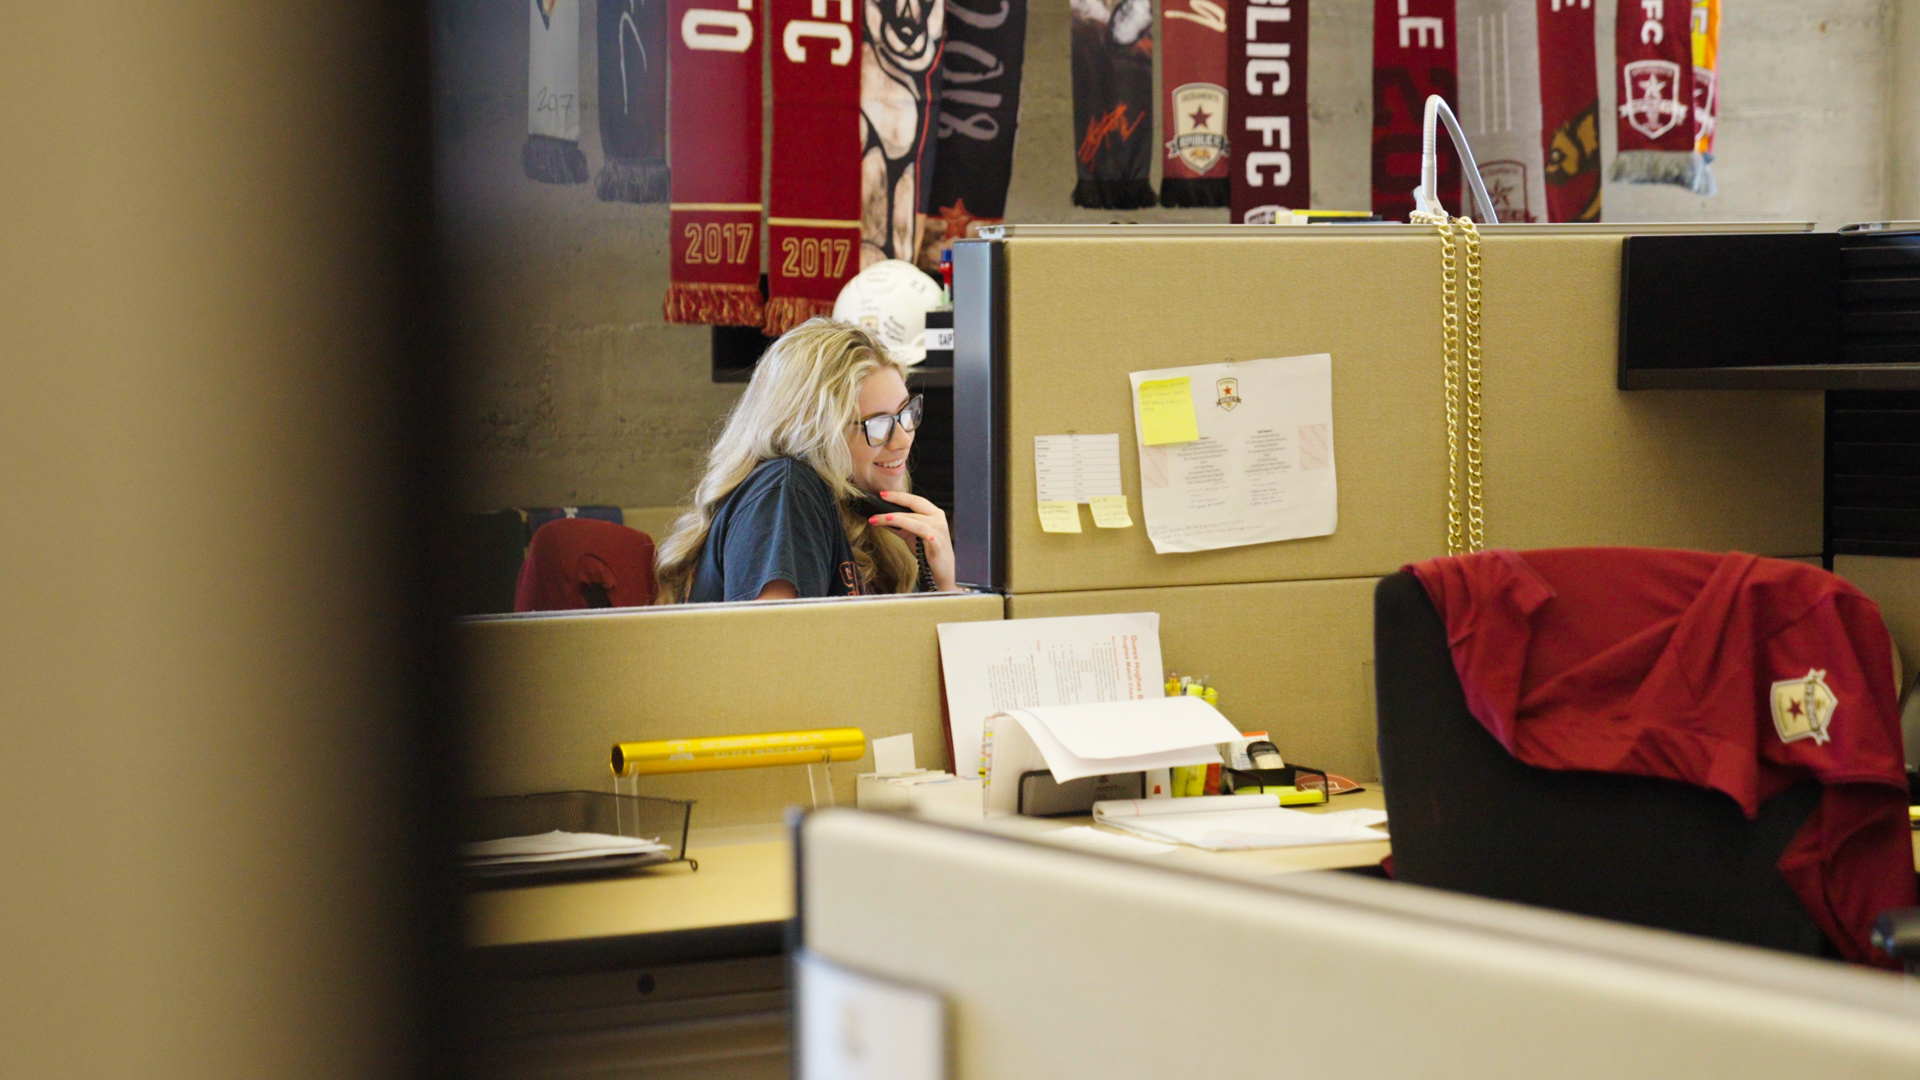 A Sacramento Republic FC employee takes a phone call in the team's offices.